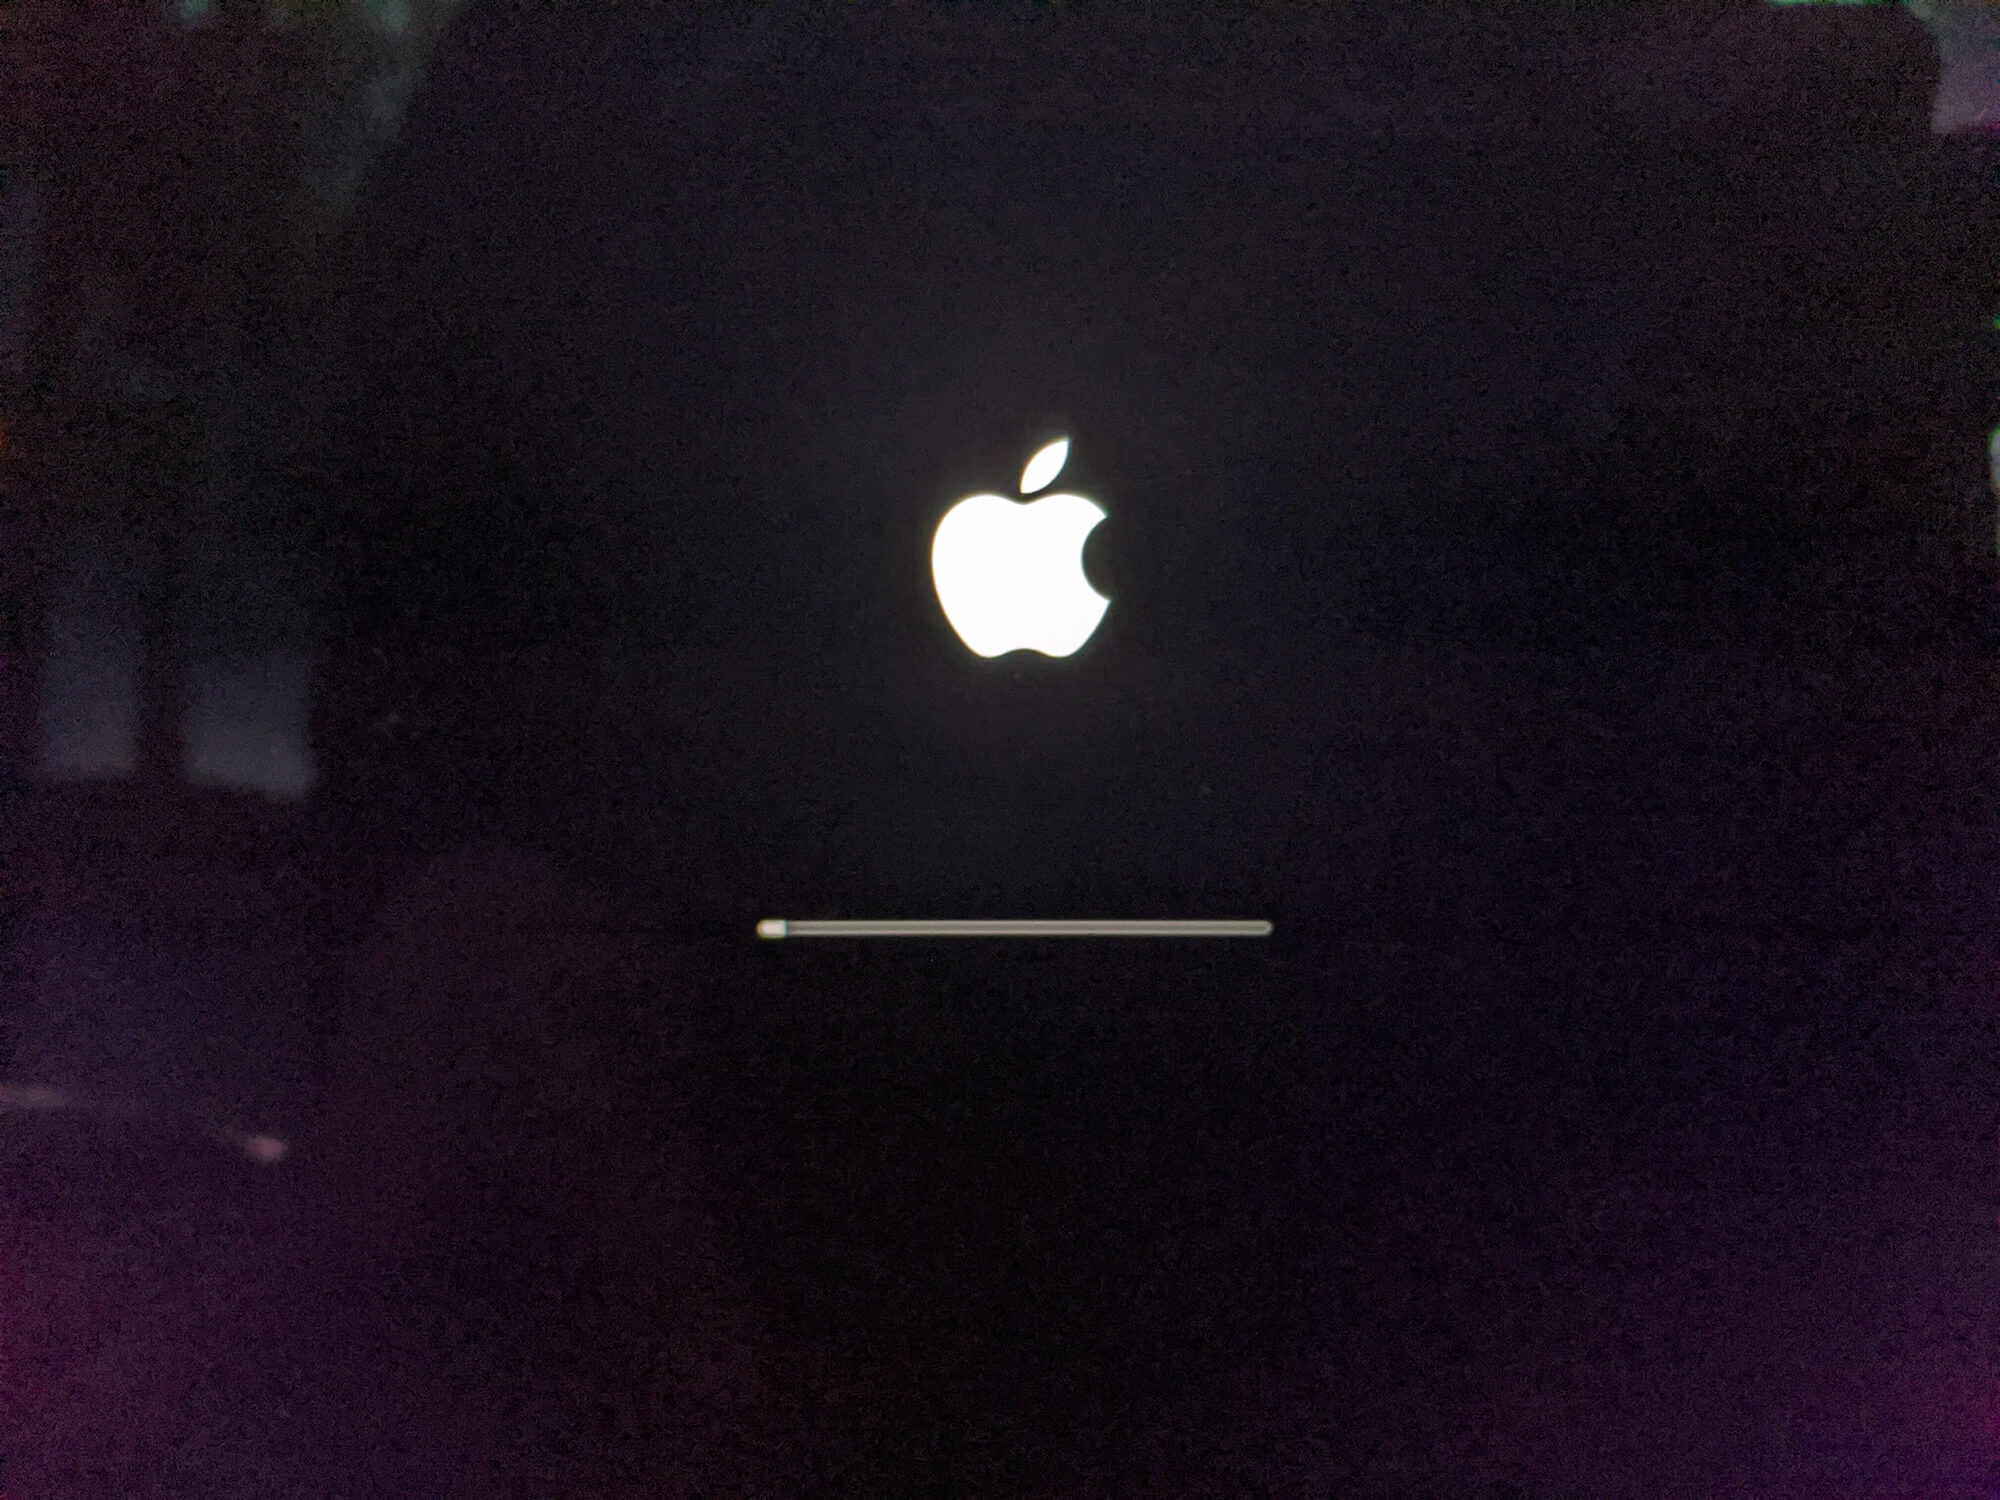 Black screen with apple logo with loading bar beneath it